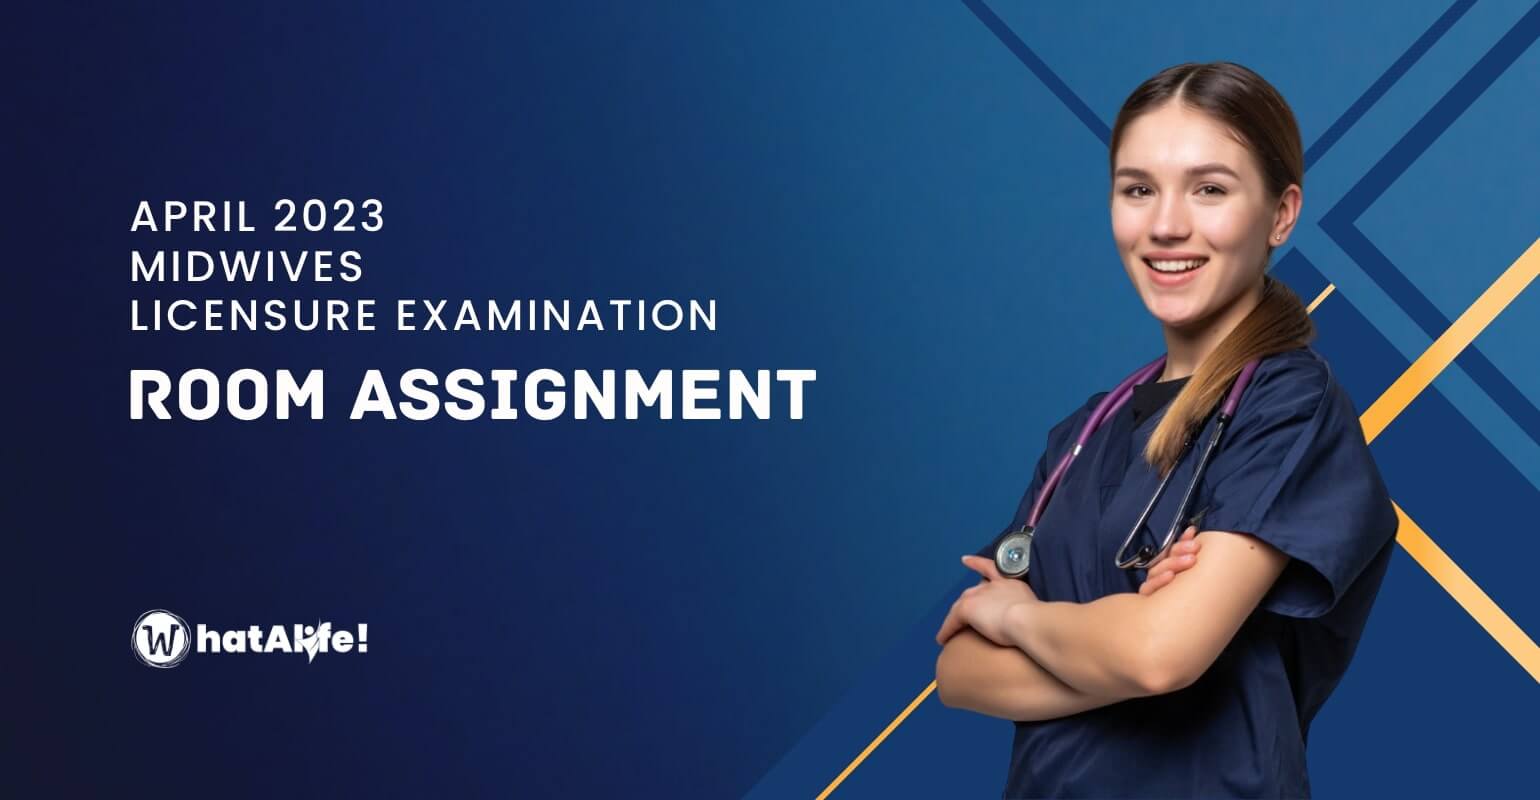 room assignment april 2023 midwives licensure exam